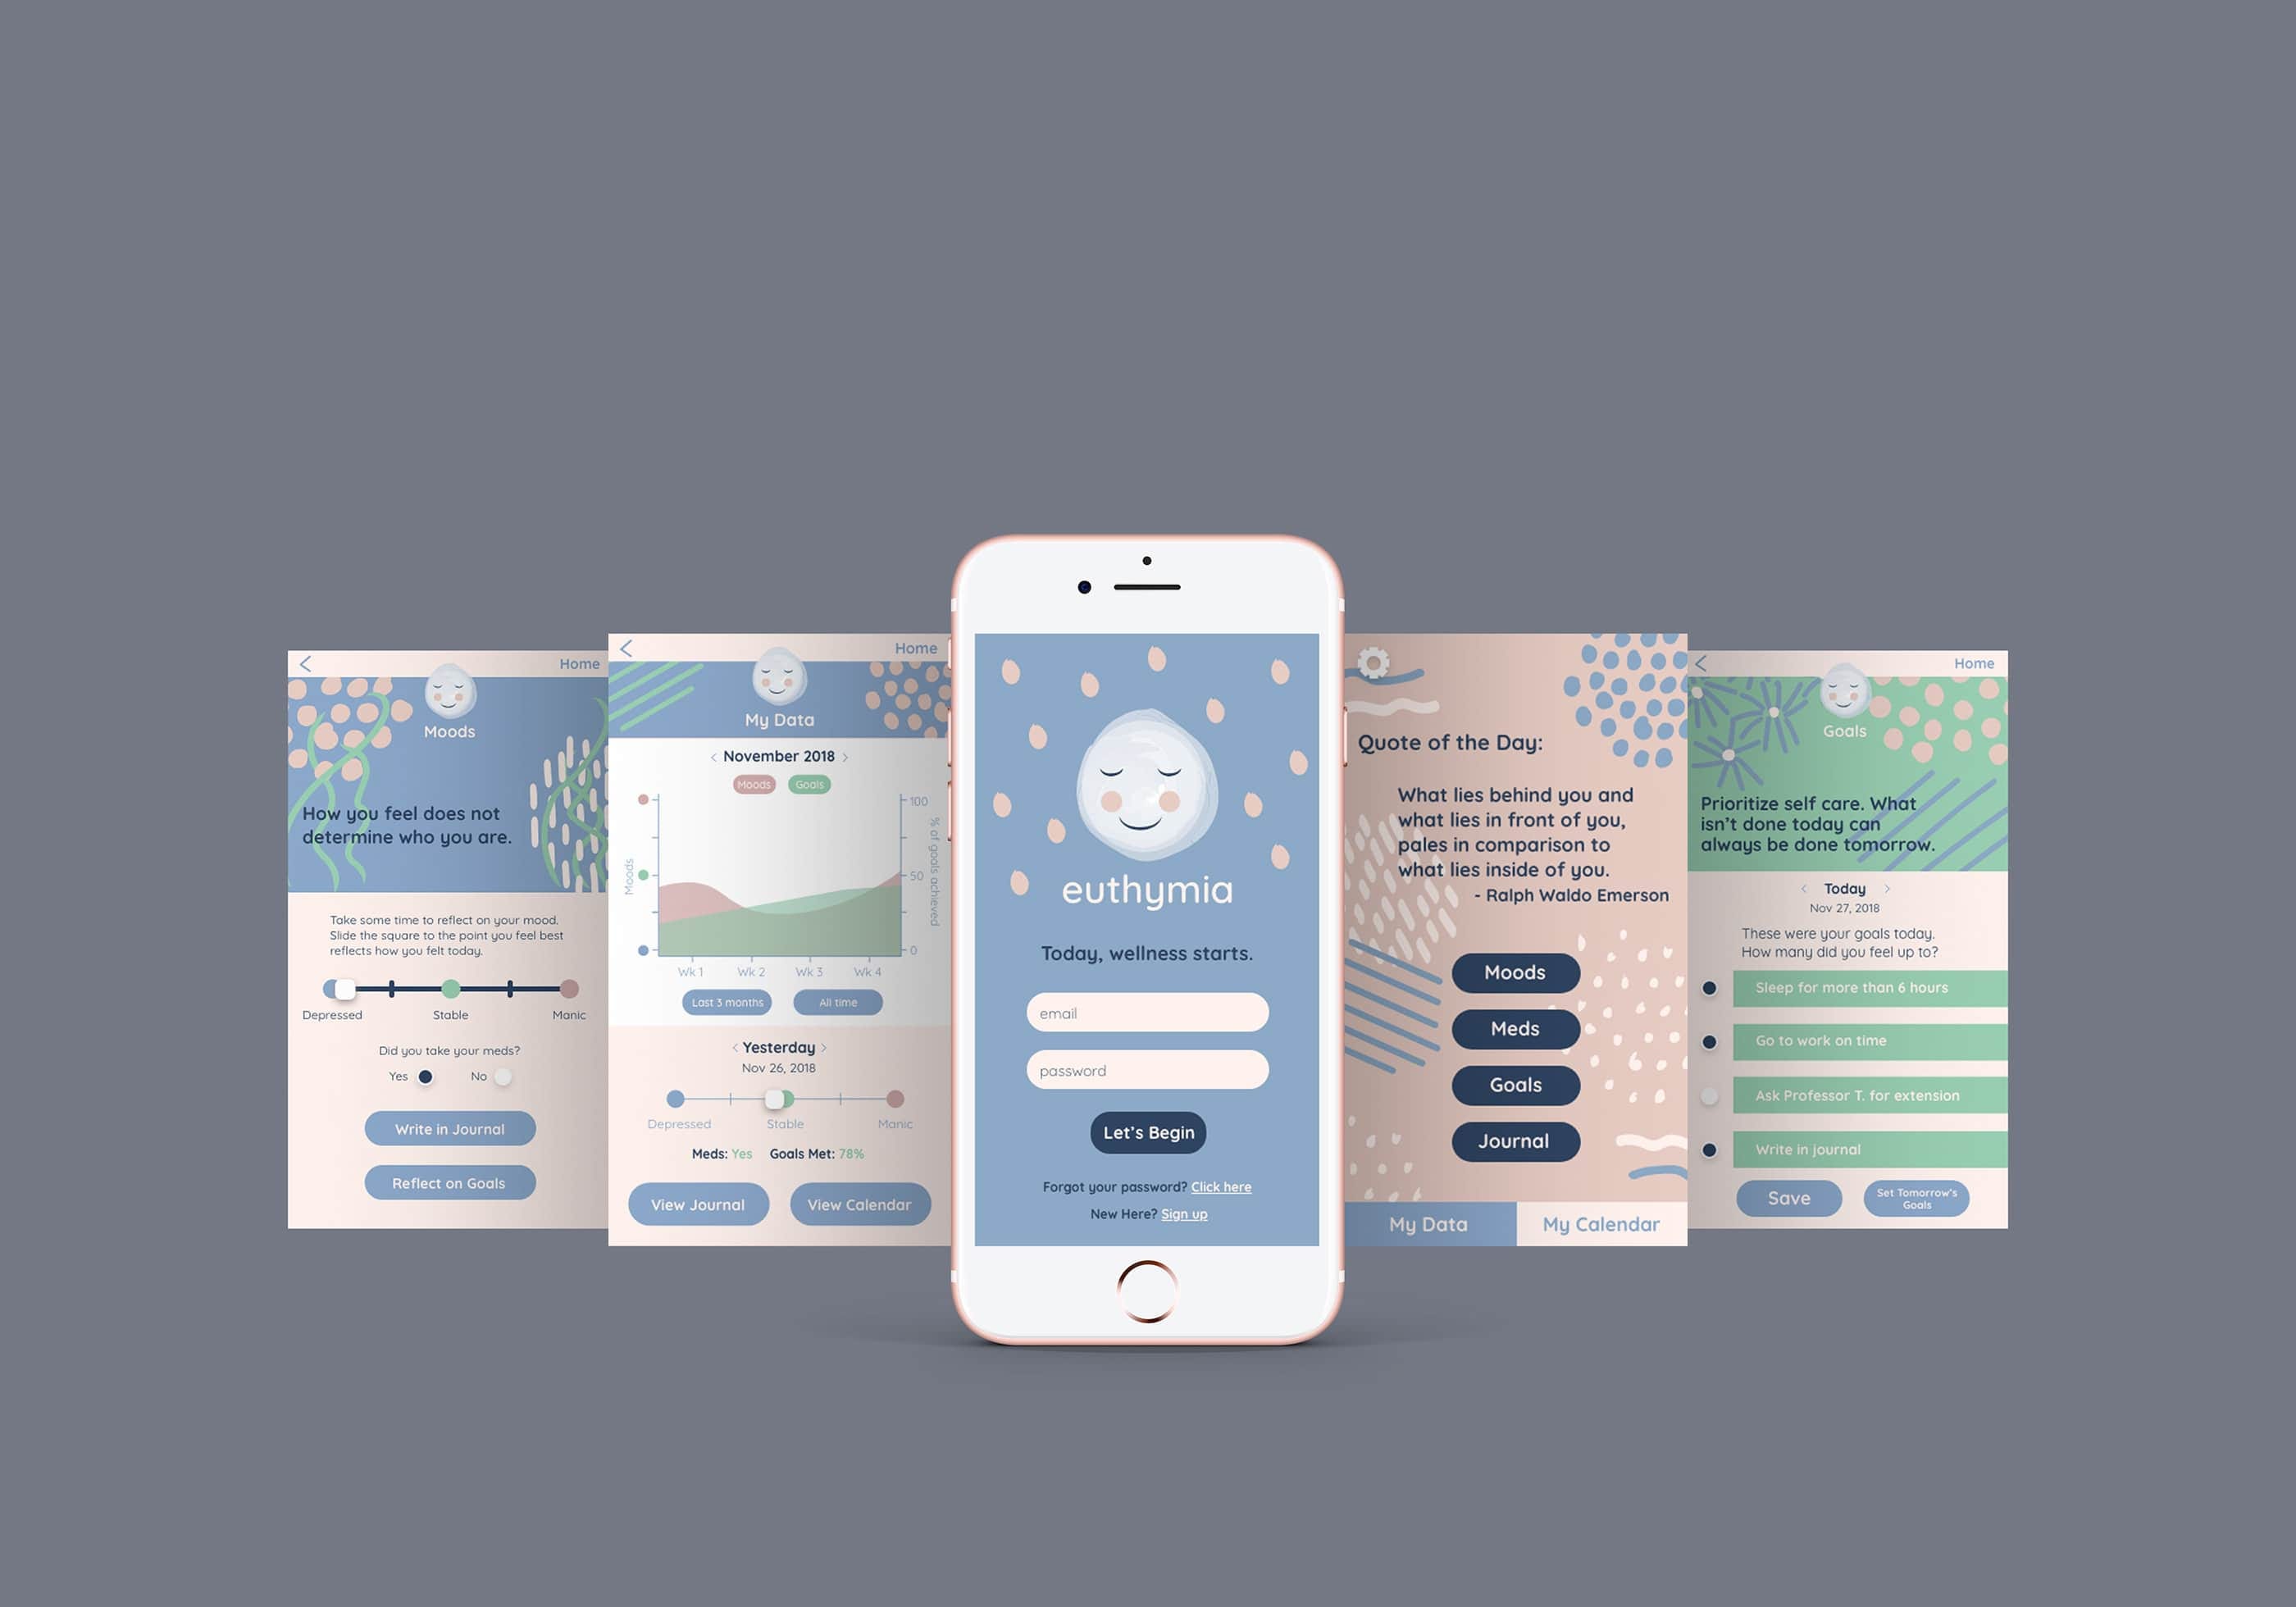 Euthymia Mood Tracking And Goal Setting App Design By Jacqueline Simpson Medium